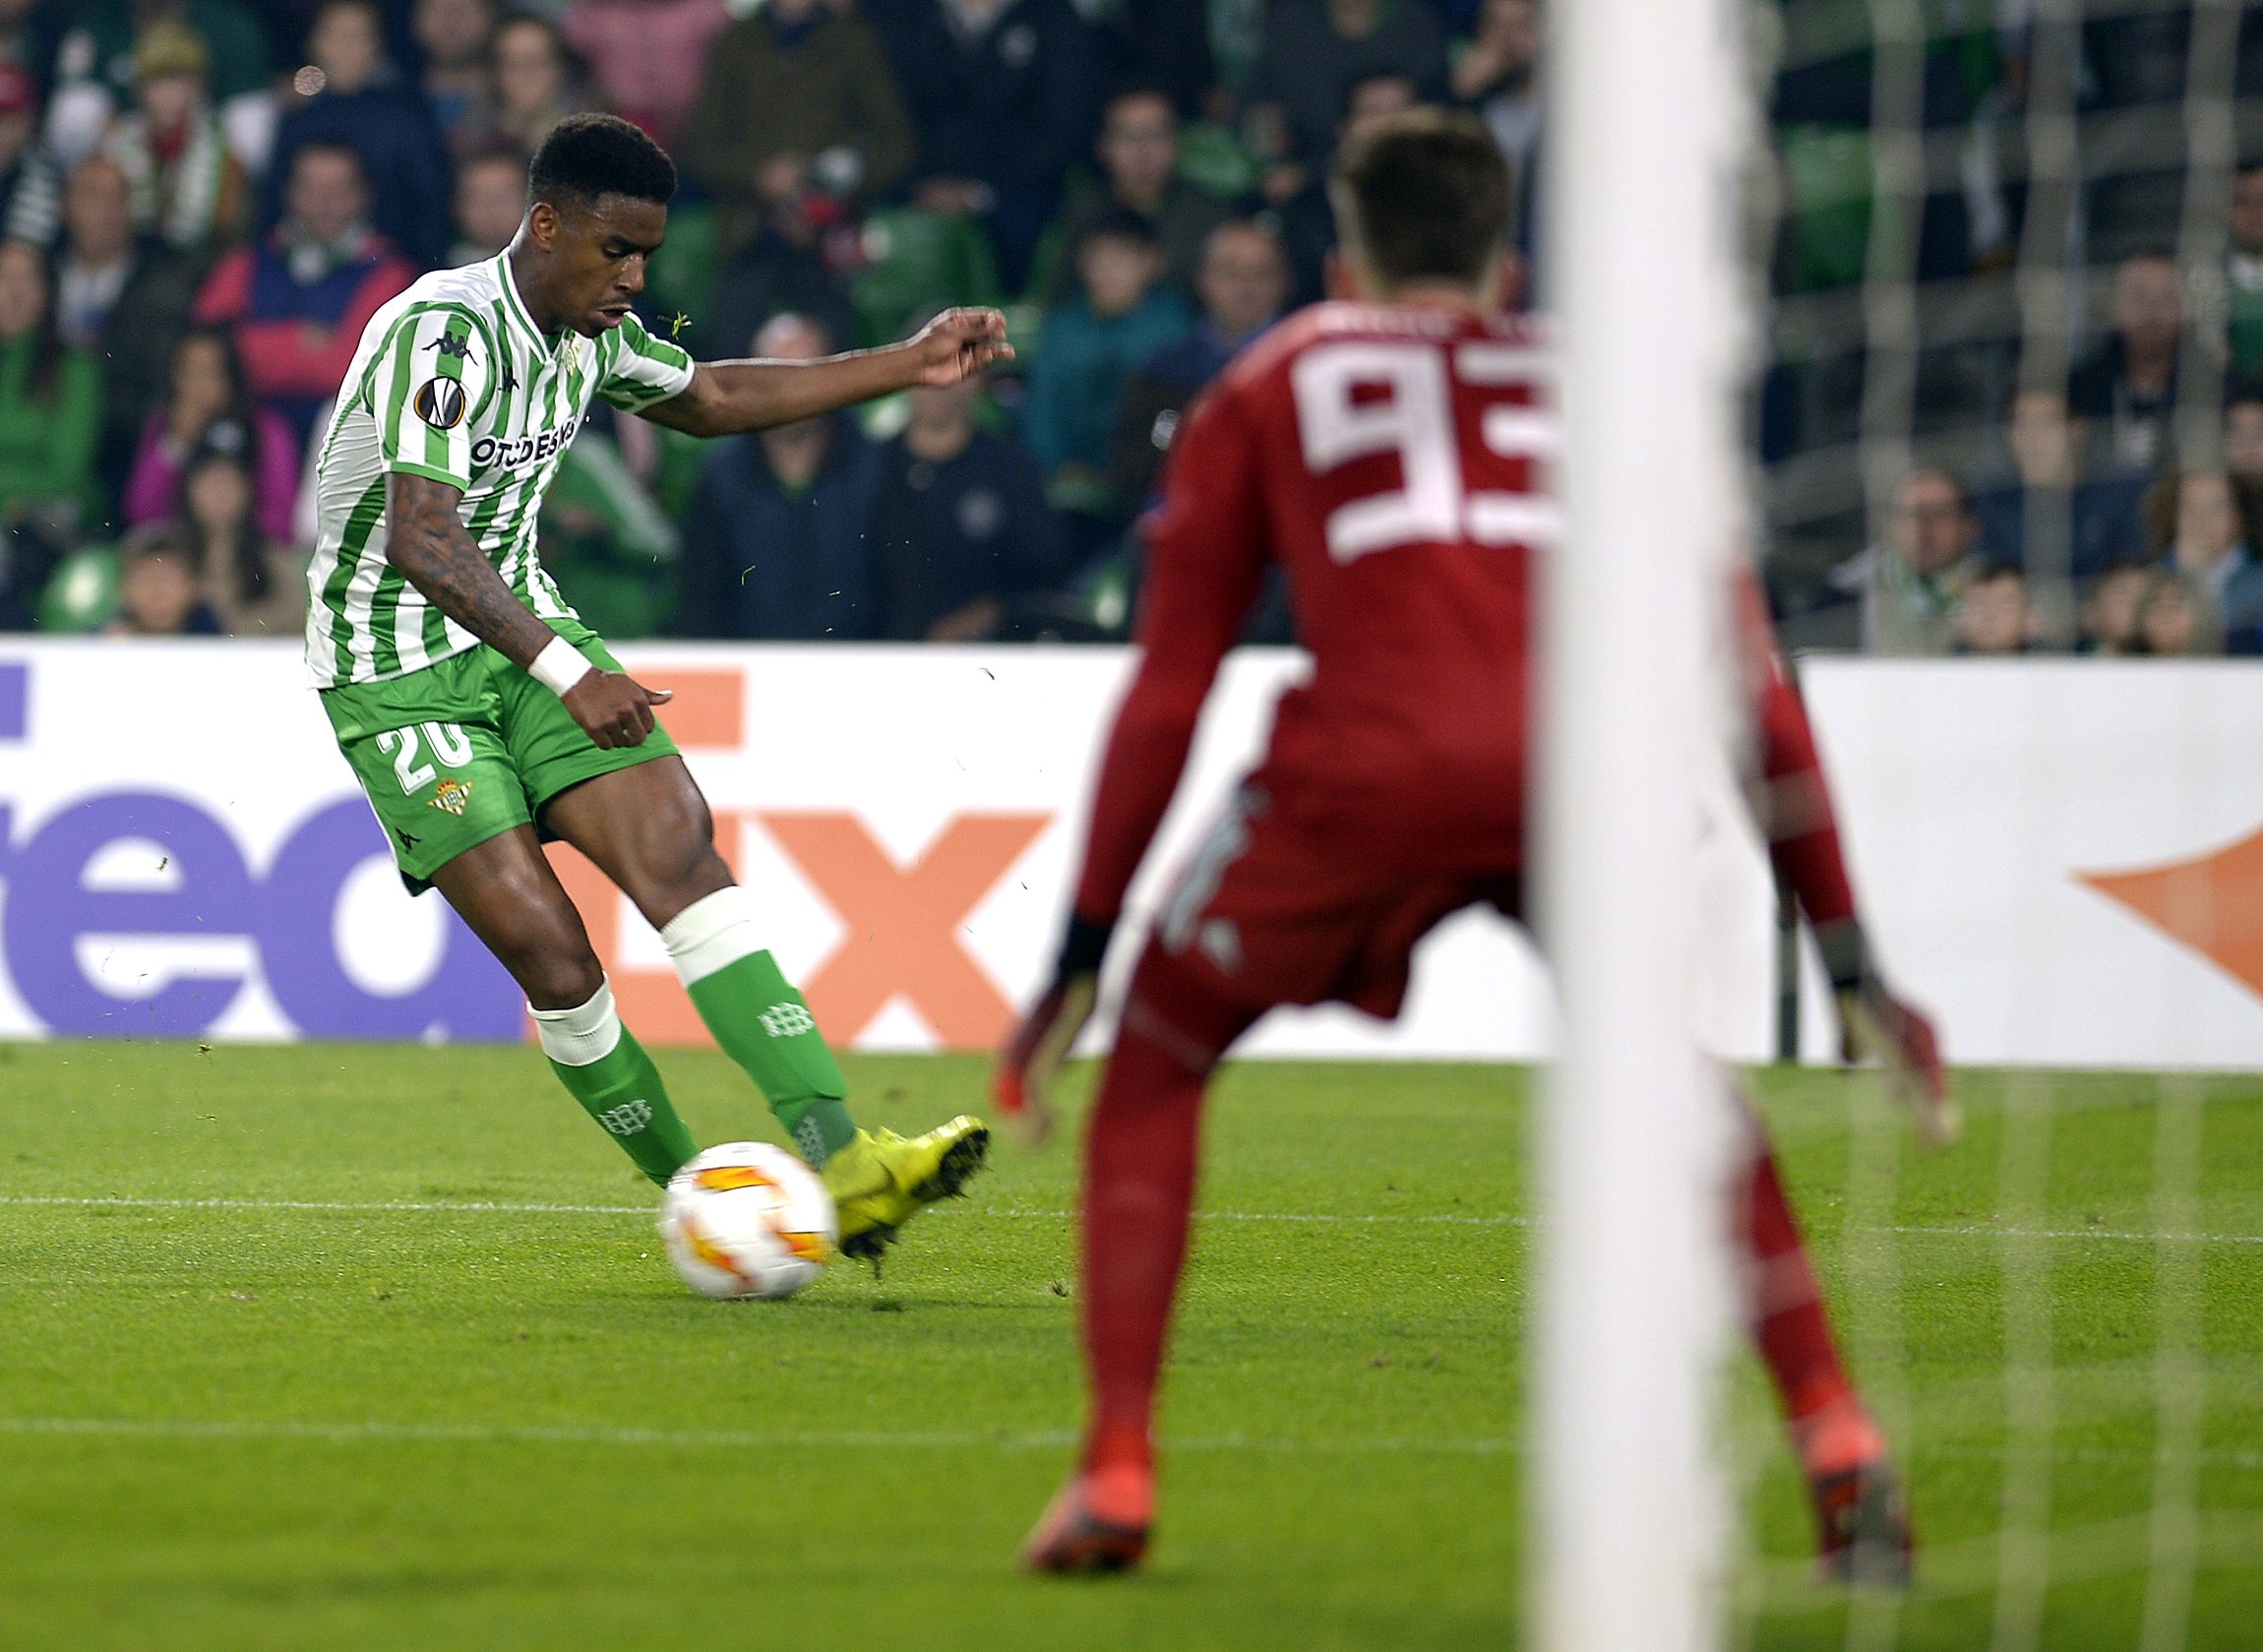 Real Betis' Dominican defender Junior Firpo (L) vies with Olympiakos' Portuguese goalkeeper Jose Sa (R) during the UEFA Europa League group F stage football match Real Betis vs Olympiakos at the Benito Villamarin stadium in Sevilla on November 29, 2018. (Photo by CRISTINA QUICLER / AFP)        (Photo credit should read CRISTINA QUICLER/AFP/Getty Images)